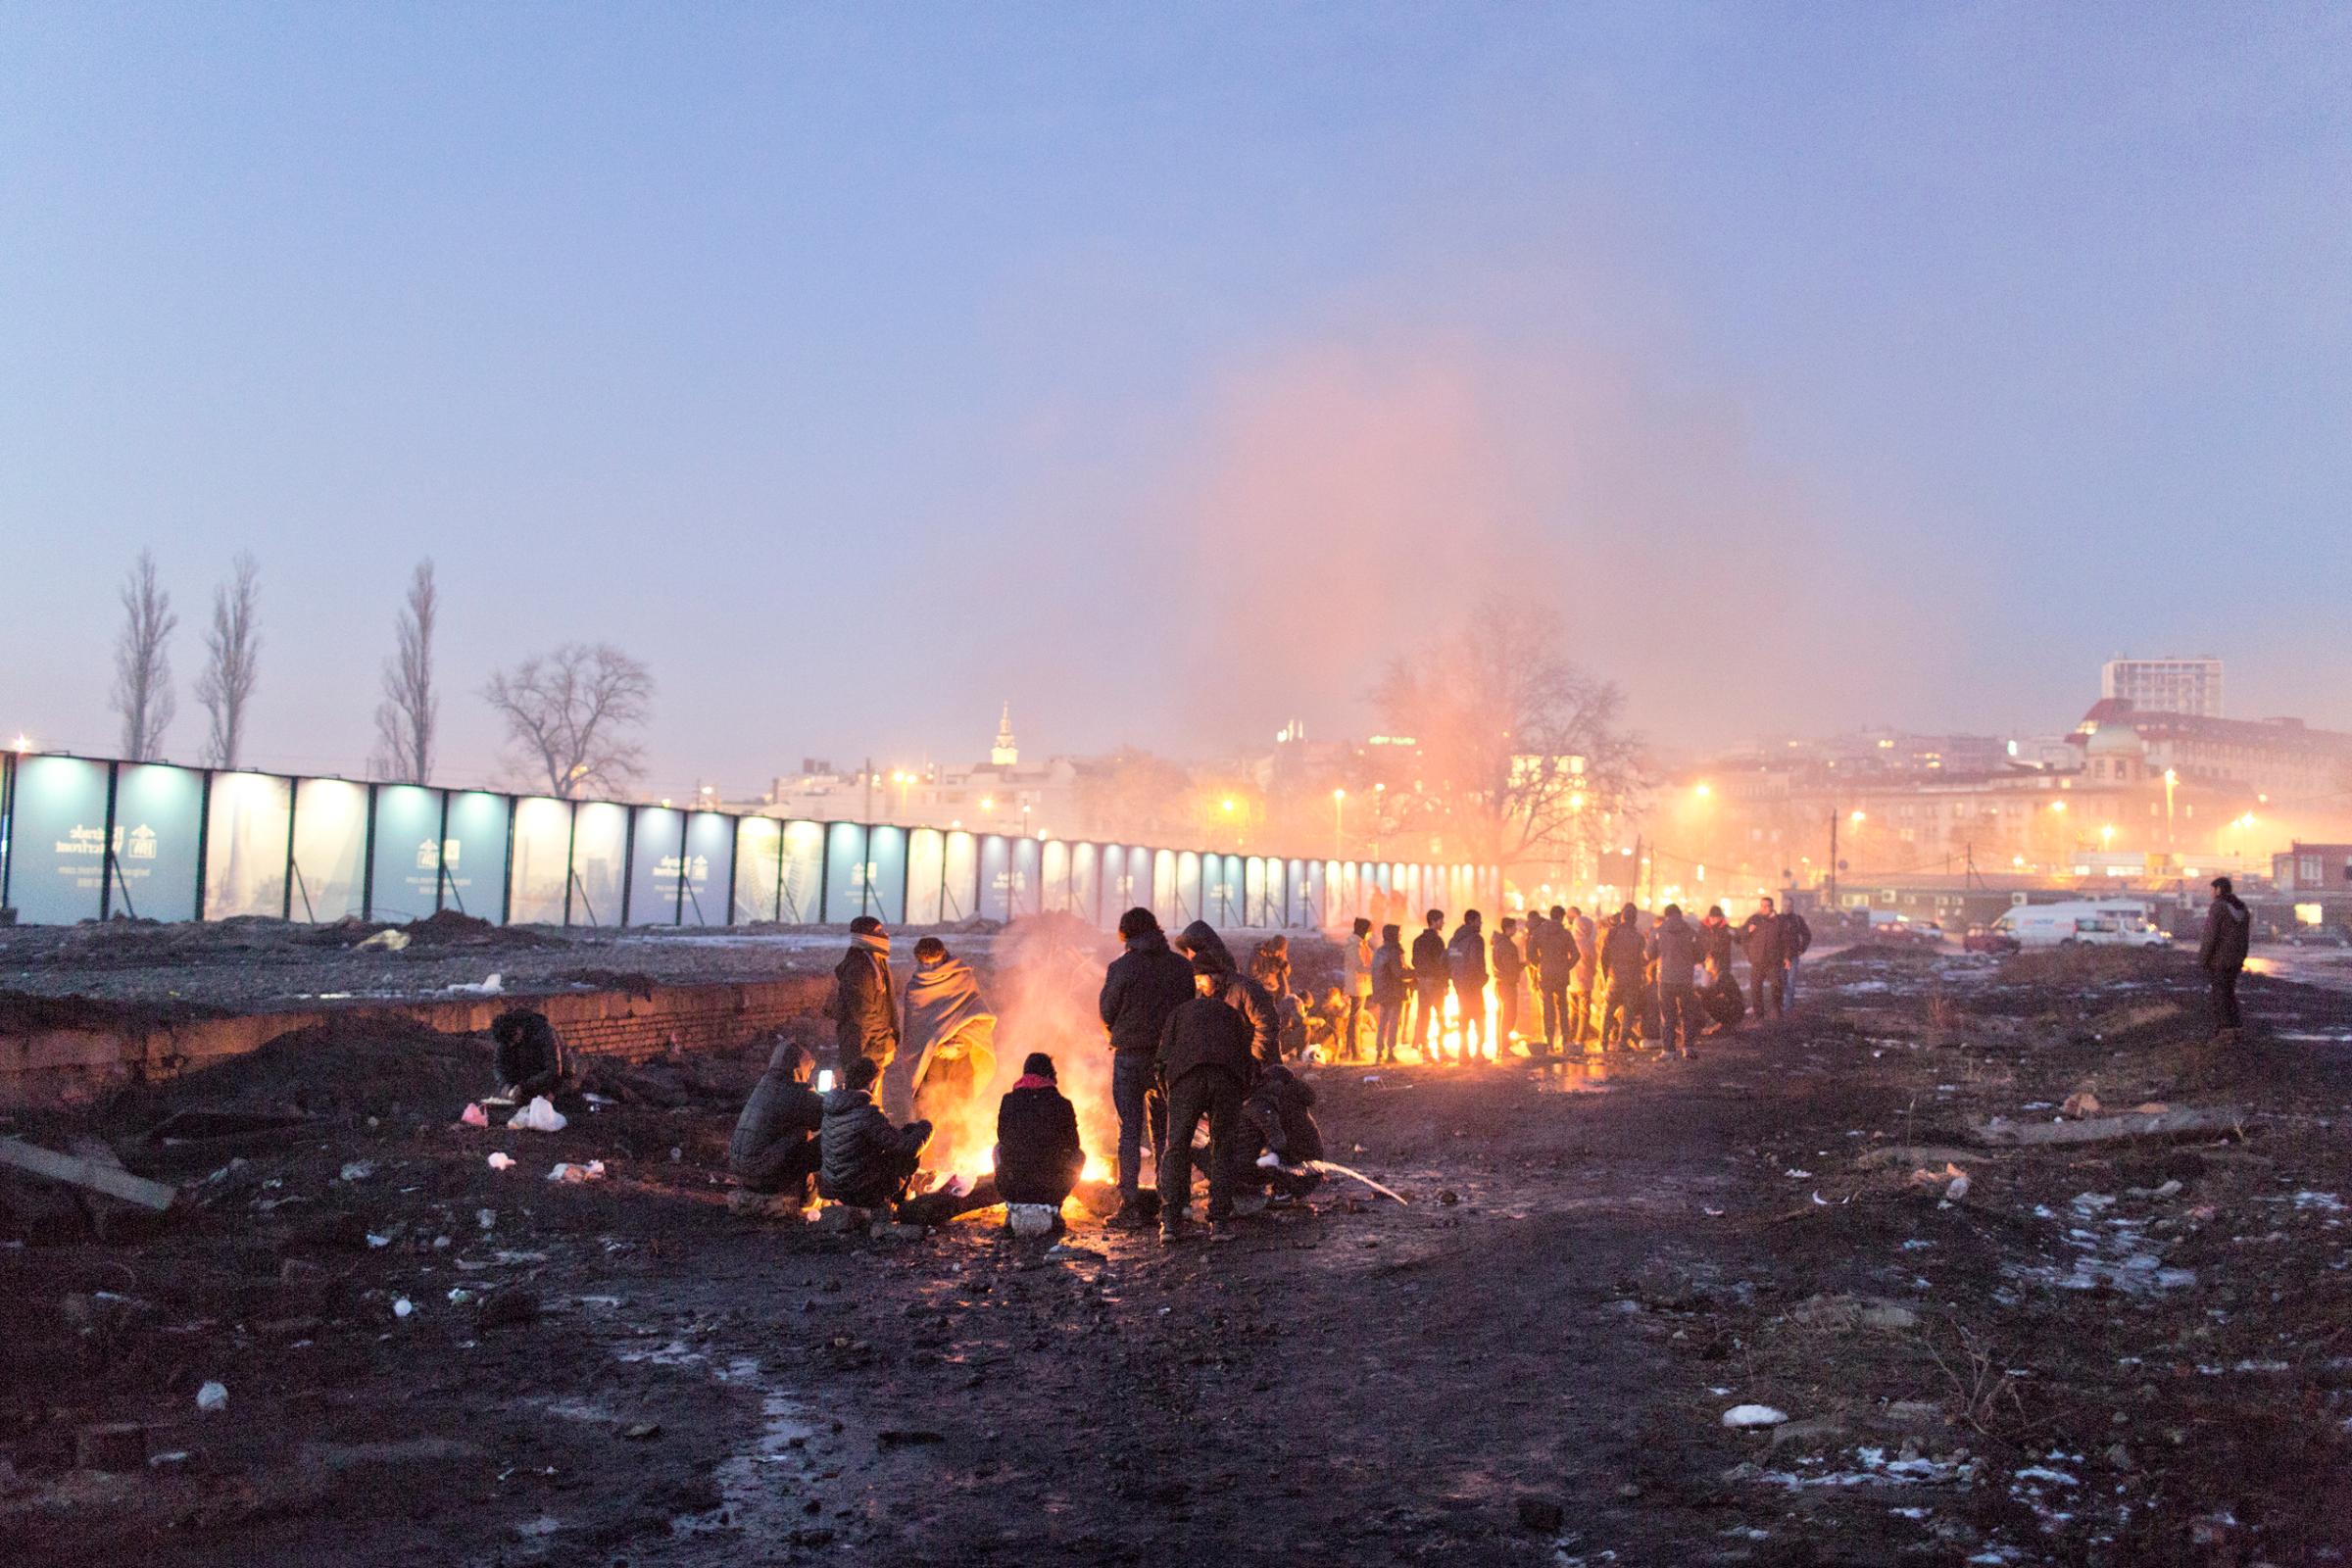 A group of migrants from Pakistan and Afghanistan tries to keep warm by starting a makeshift fire in abandoned warehouse in Belgrade, Jan. 14, 2017.More than a thousand refugees, mostly Afghans, live on the streets in central Belgrade, in miserable conditions and facing freezing temperatures, awaiting an opportunity to enter the European Union.